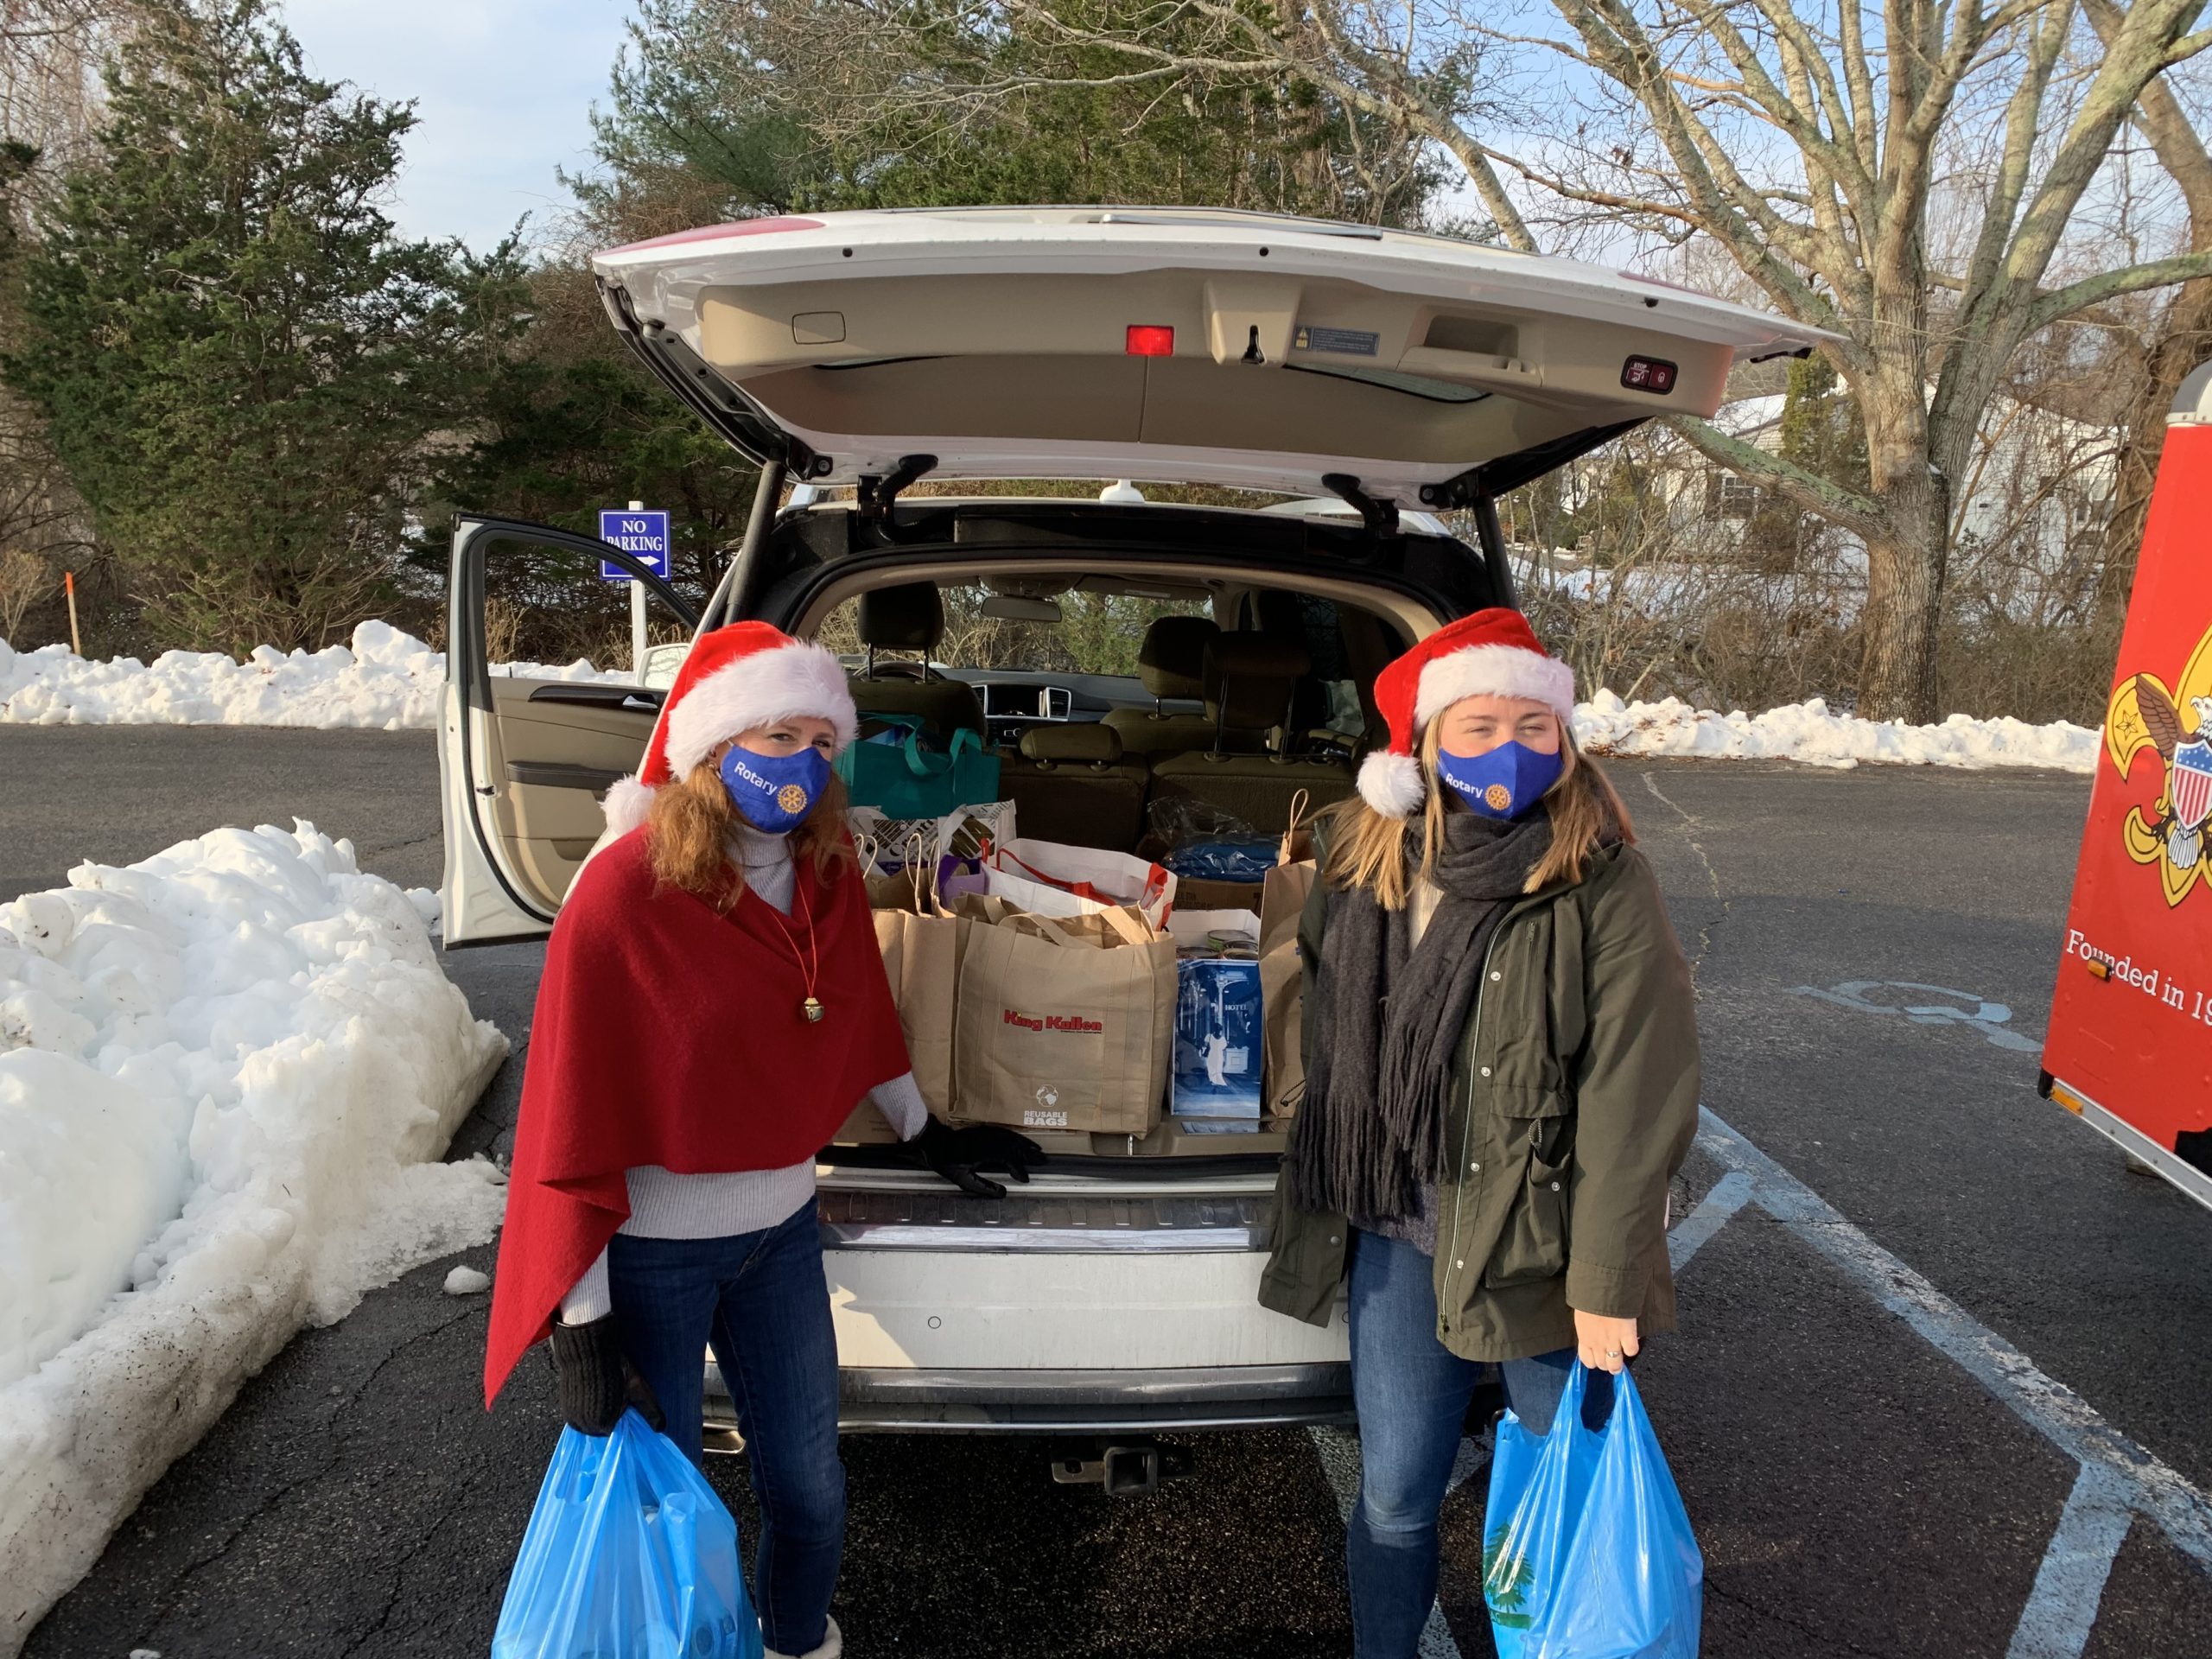 The Hampton Bays Rotary, including Anna and Julie Crowley, donated 13 heavy bags of food and $155 to the Hampton Bays Food Pantry as a part of the Rotary District 7255 and Hampton Bays Rotary “25 Days of Giving.” St. Rosalie’s Food Pantry serves many people in the Hampton Bays and East Quogue communities and during these difficult times we are extra grateful for their support. Catherine Andrejack, the director of the pantry, reports the pantry is serving about 500 people a month and is accepting financial donations as well as fresh produce and dairy items. To donate, contact the outreach office at 631-728-9461, ext. 15. 